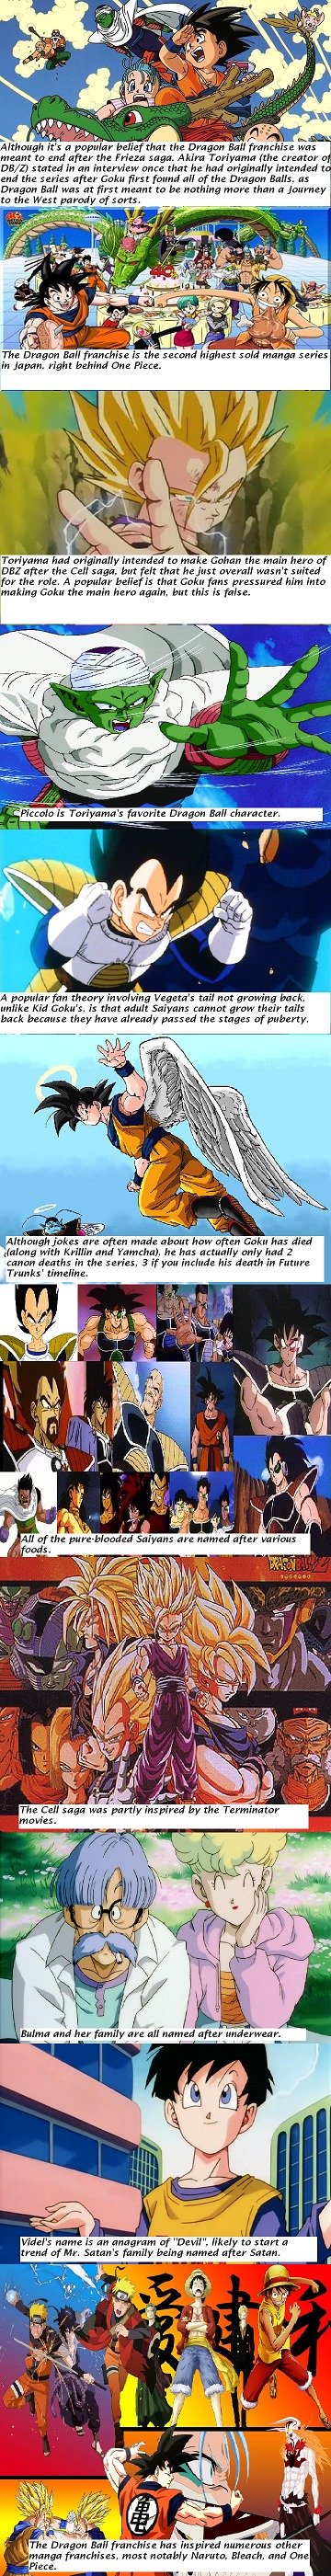 Dragon Ball Facts And Stuff